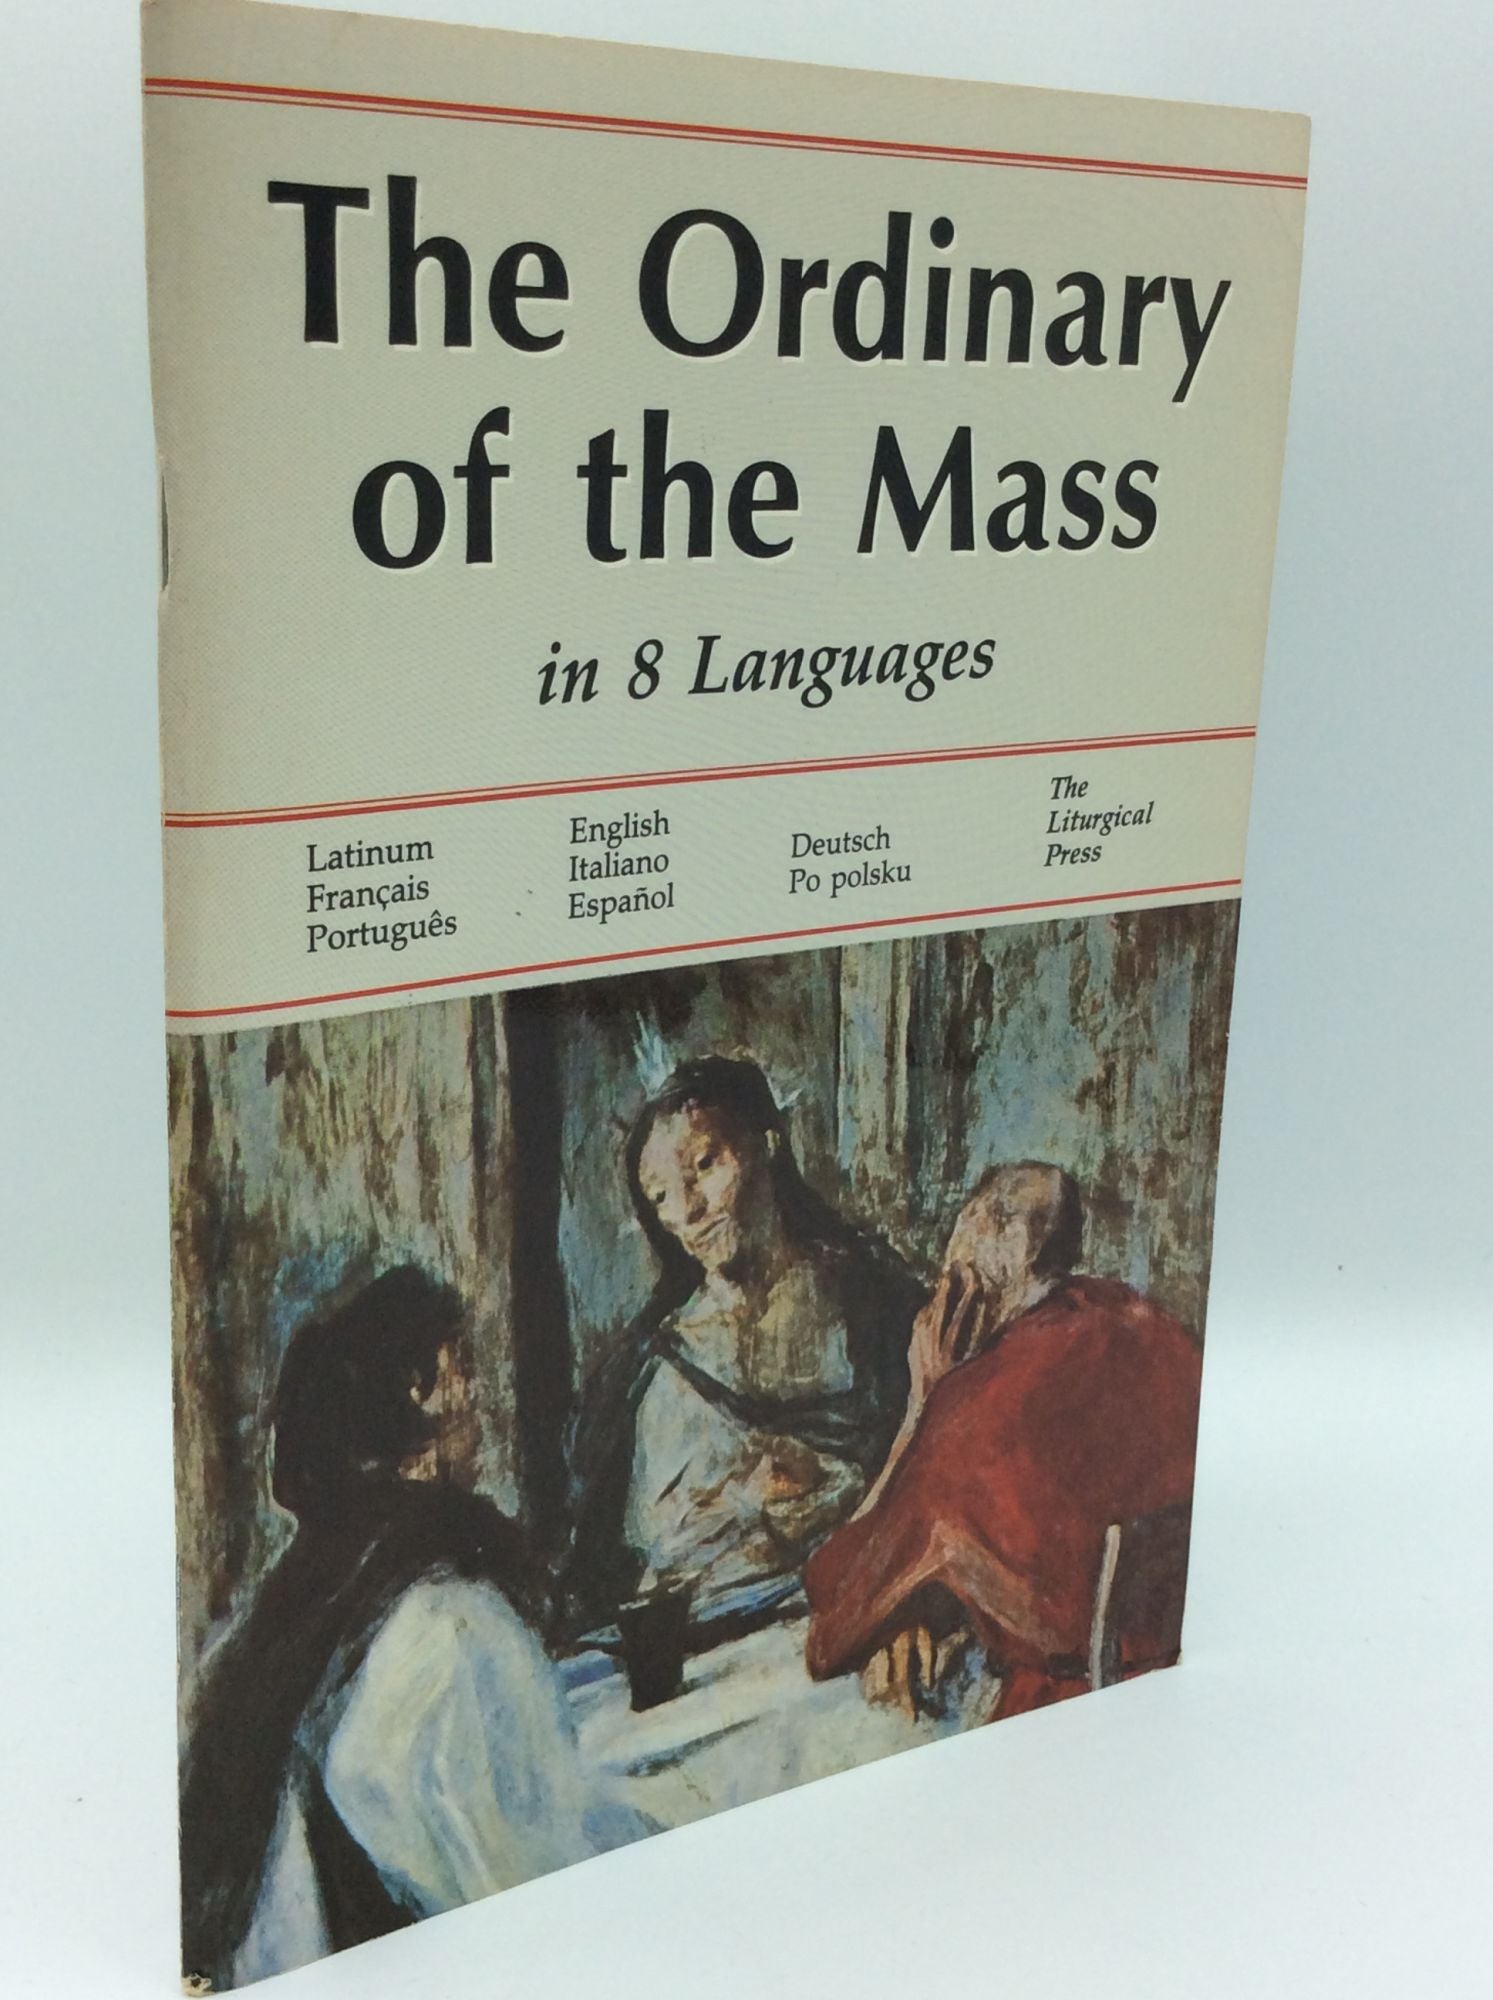  - The Ordinary of the Mass in 8 Languages